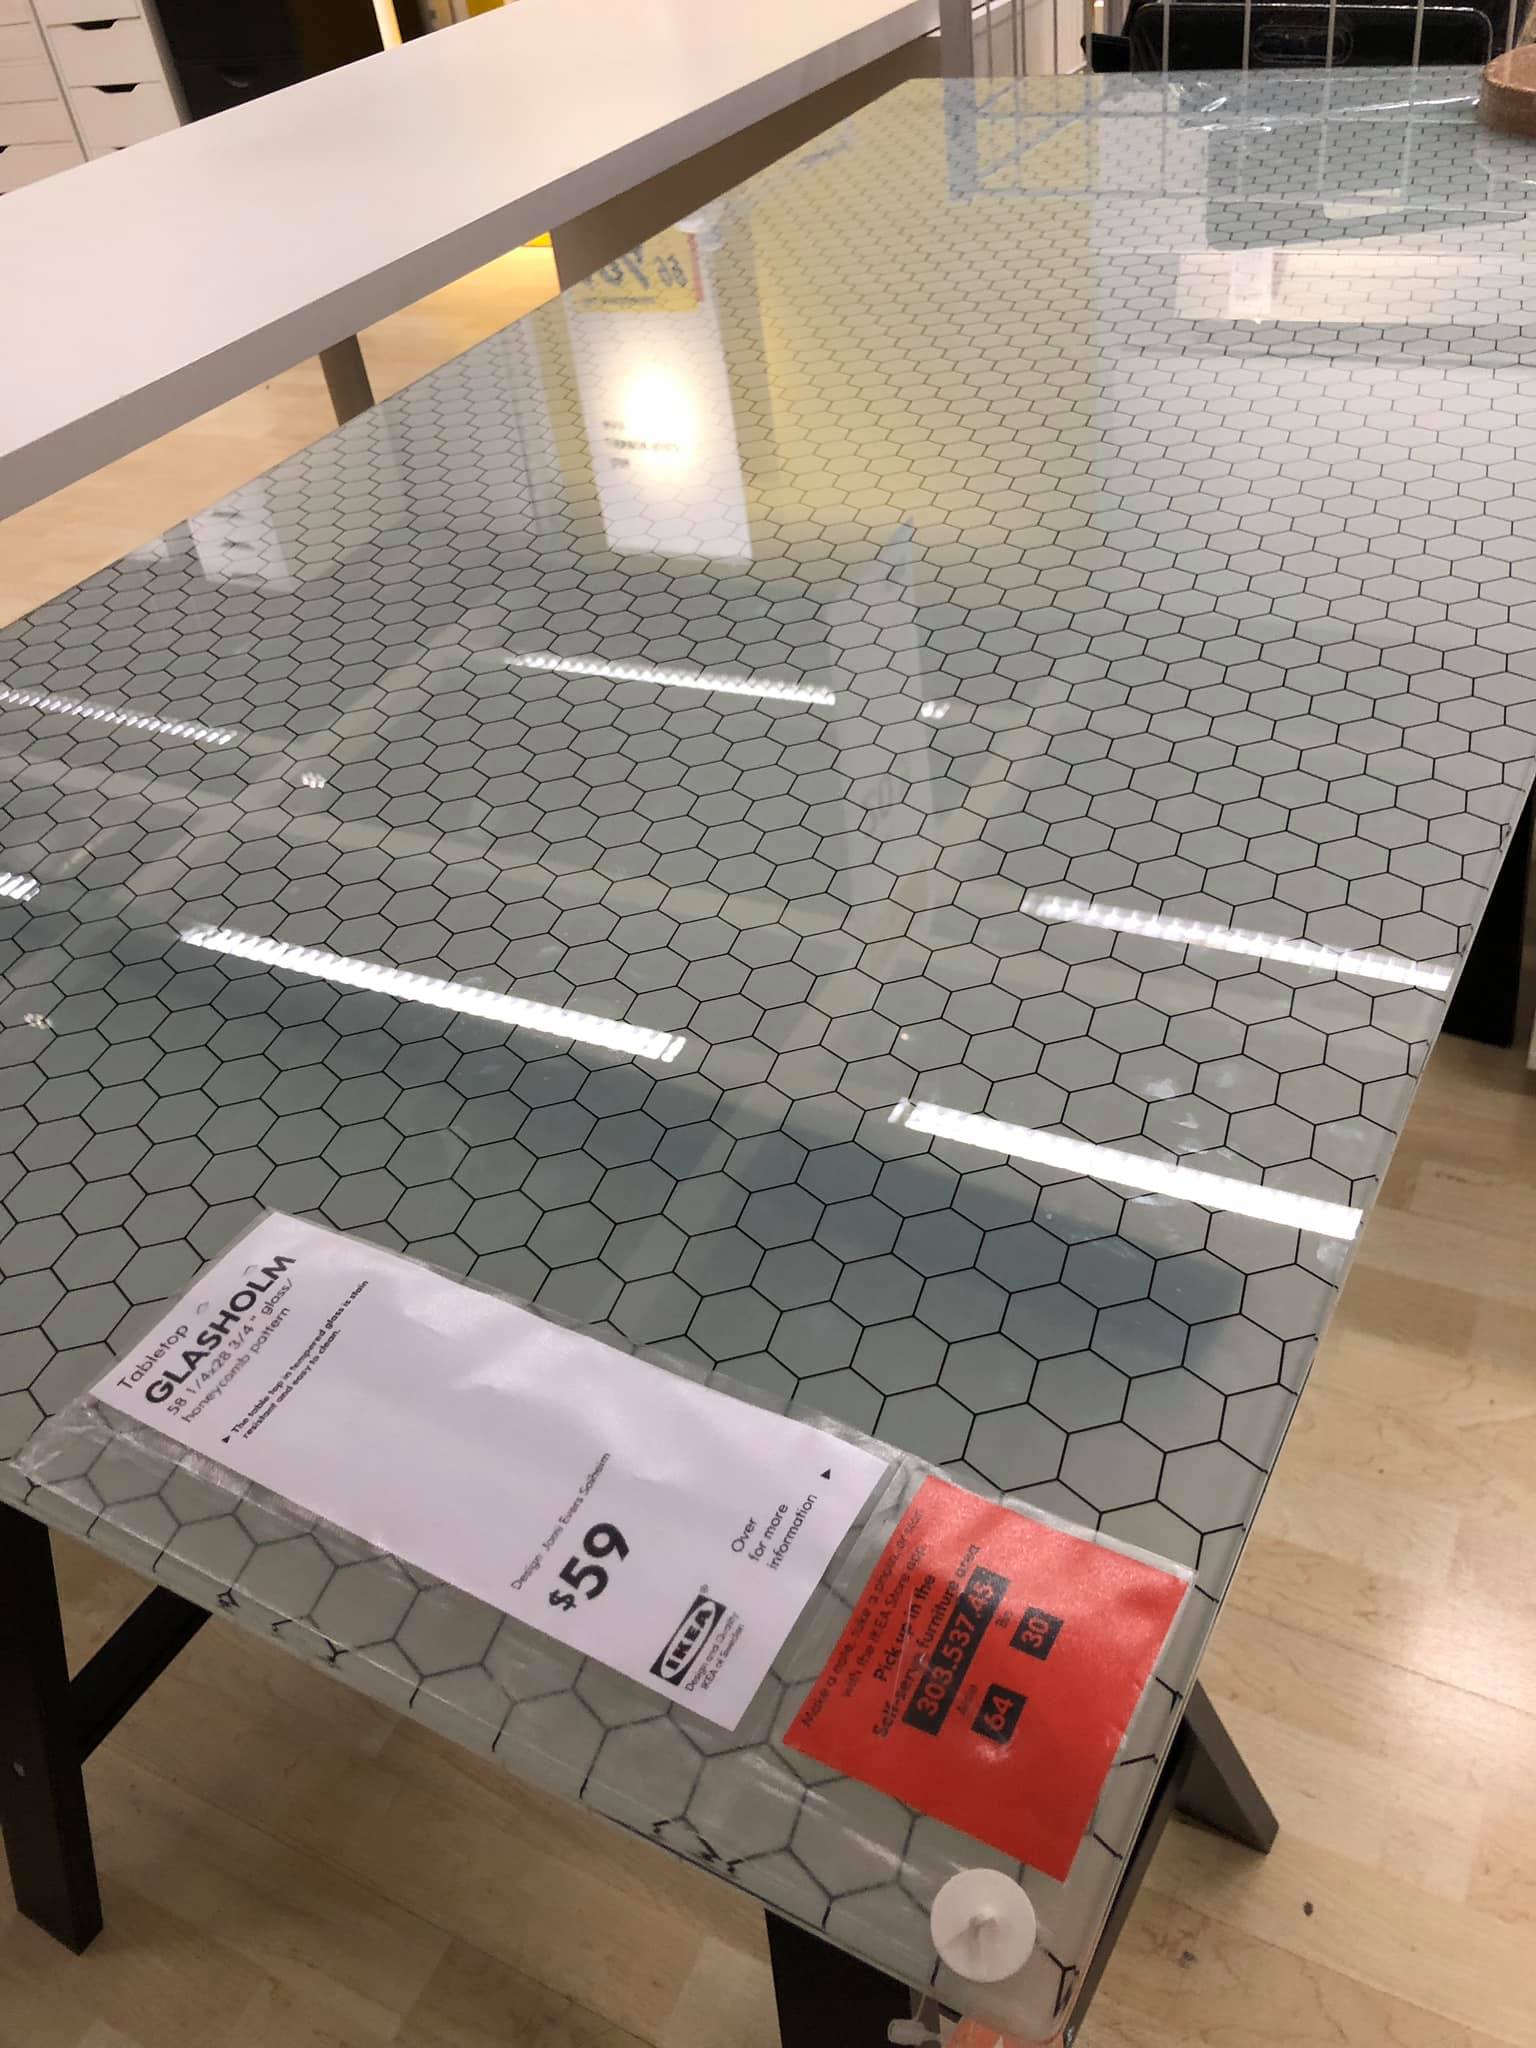 Planeet Op het randje Frustrerend D&D players discover that IKEA are selling a hex crawl table